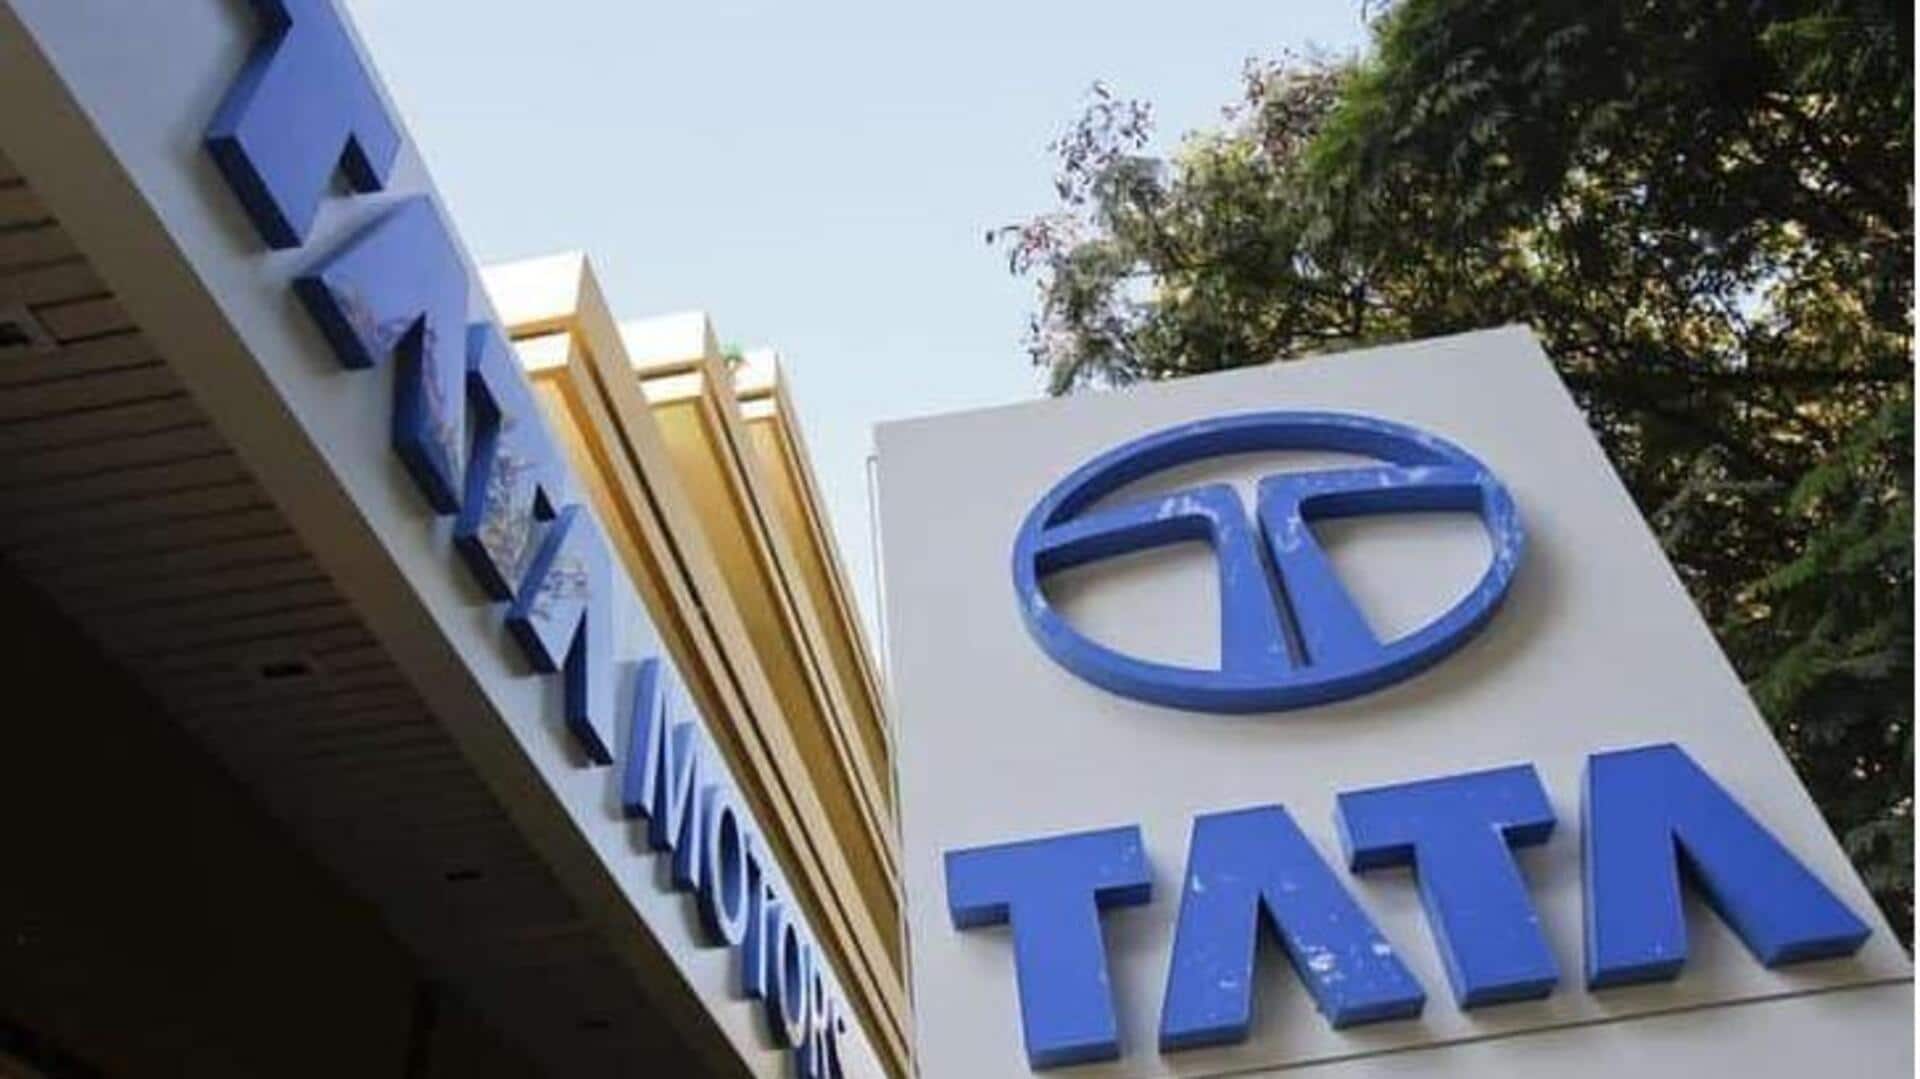 Tata Motors reaches all-time high driven by better sales data